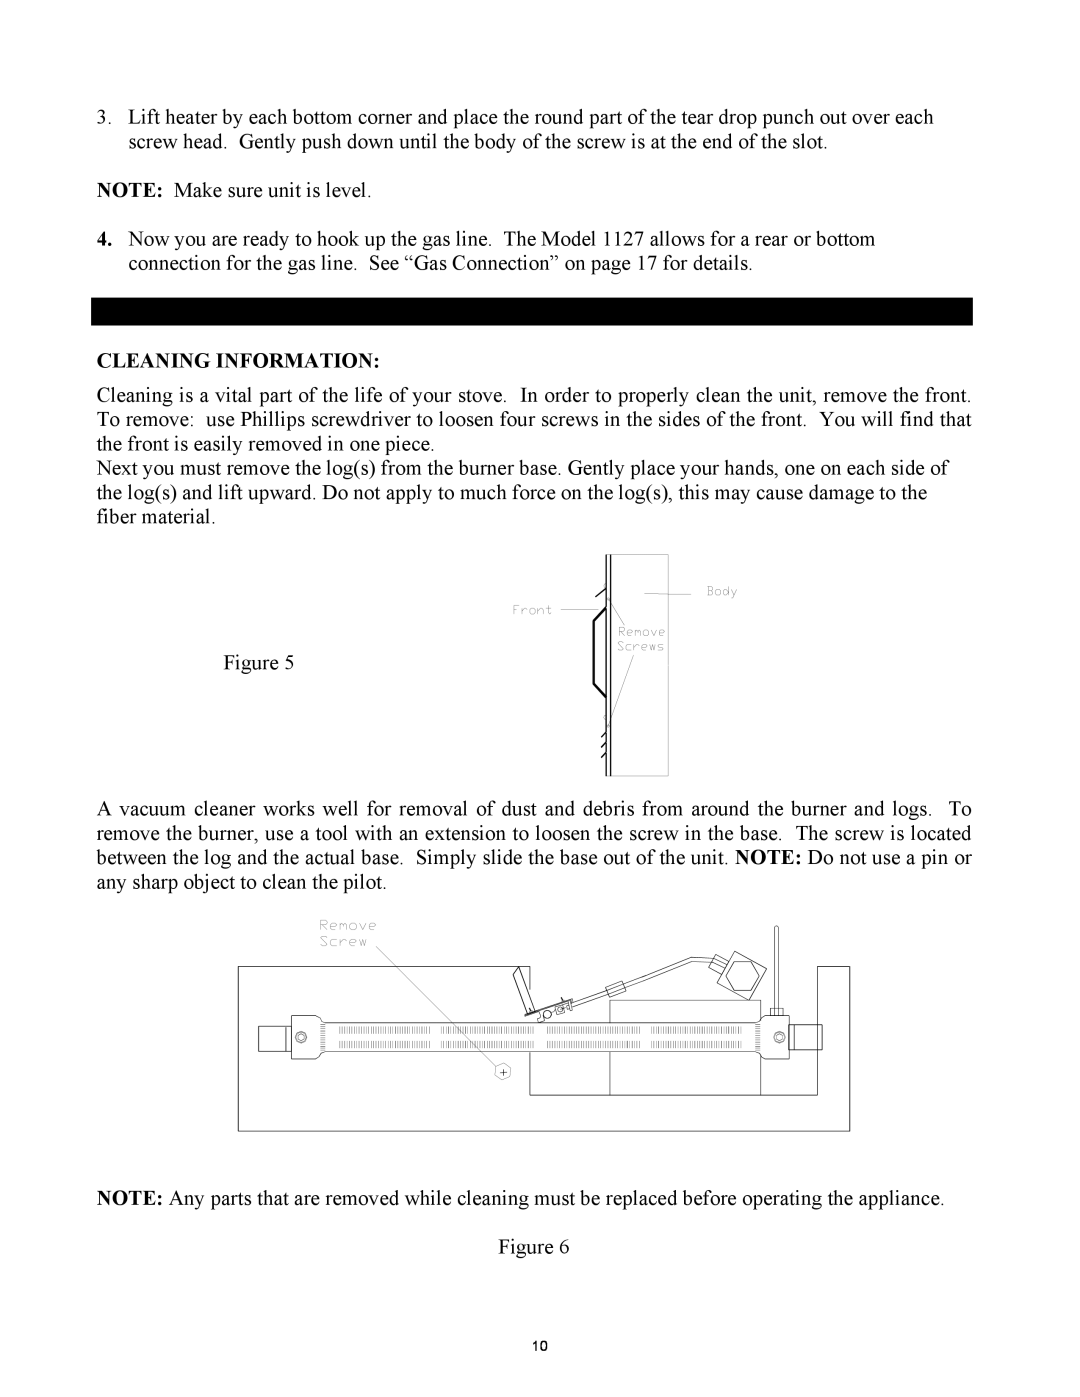 New Buck Corporation 1127B manual Cleaning Information 